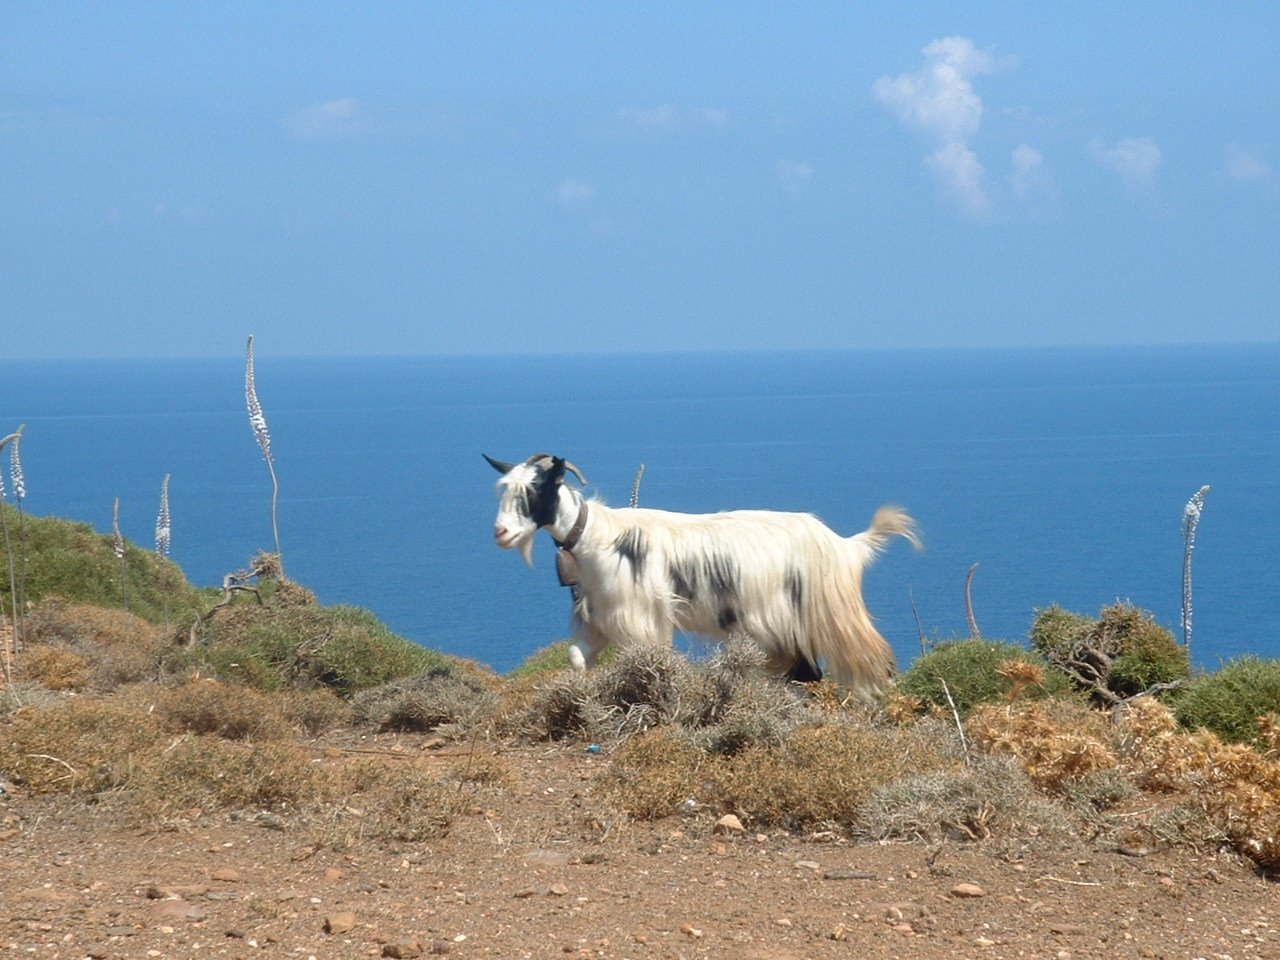 a goat on a hill near the water